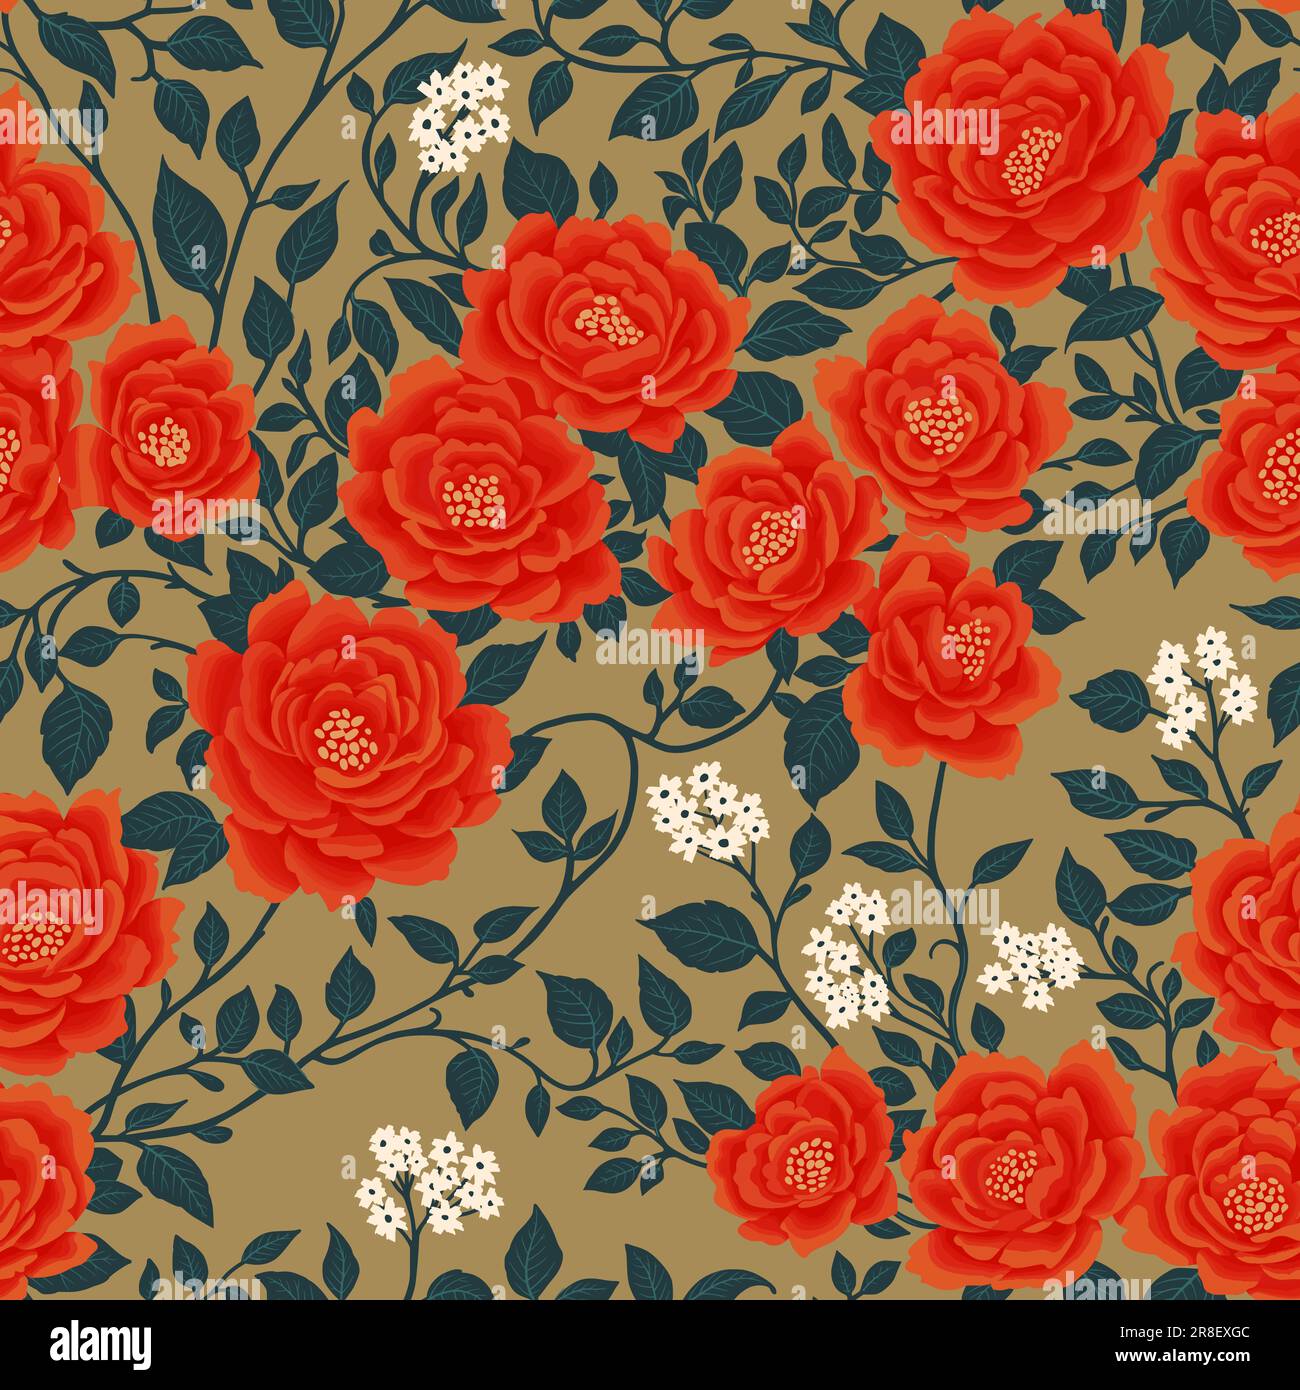 Floral Seamless Pattern of Red Flowers and Dark Green Leaves on Flaxen Backdrop in Chinoiserie Style. Hand Drawn Art, Wallpaper Design for Textile, Paper, Print, Fashion Backgrounds, Beauty Products Stock Vector